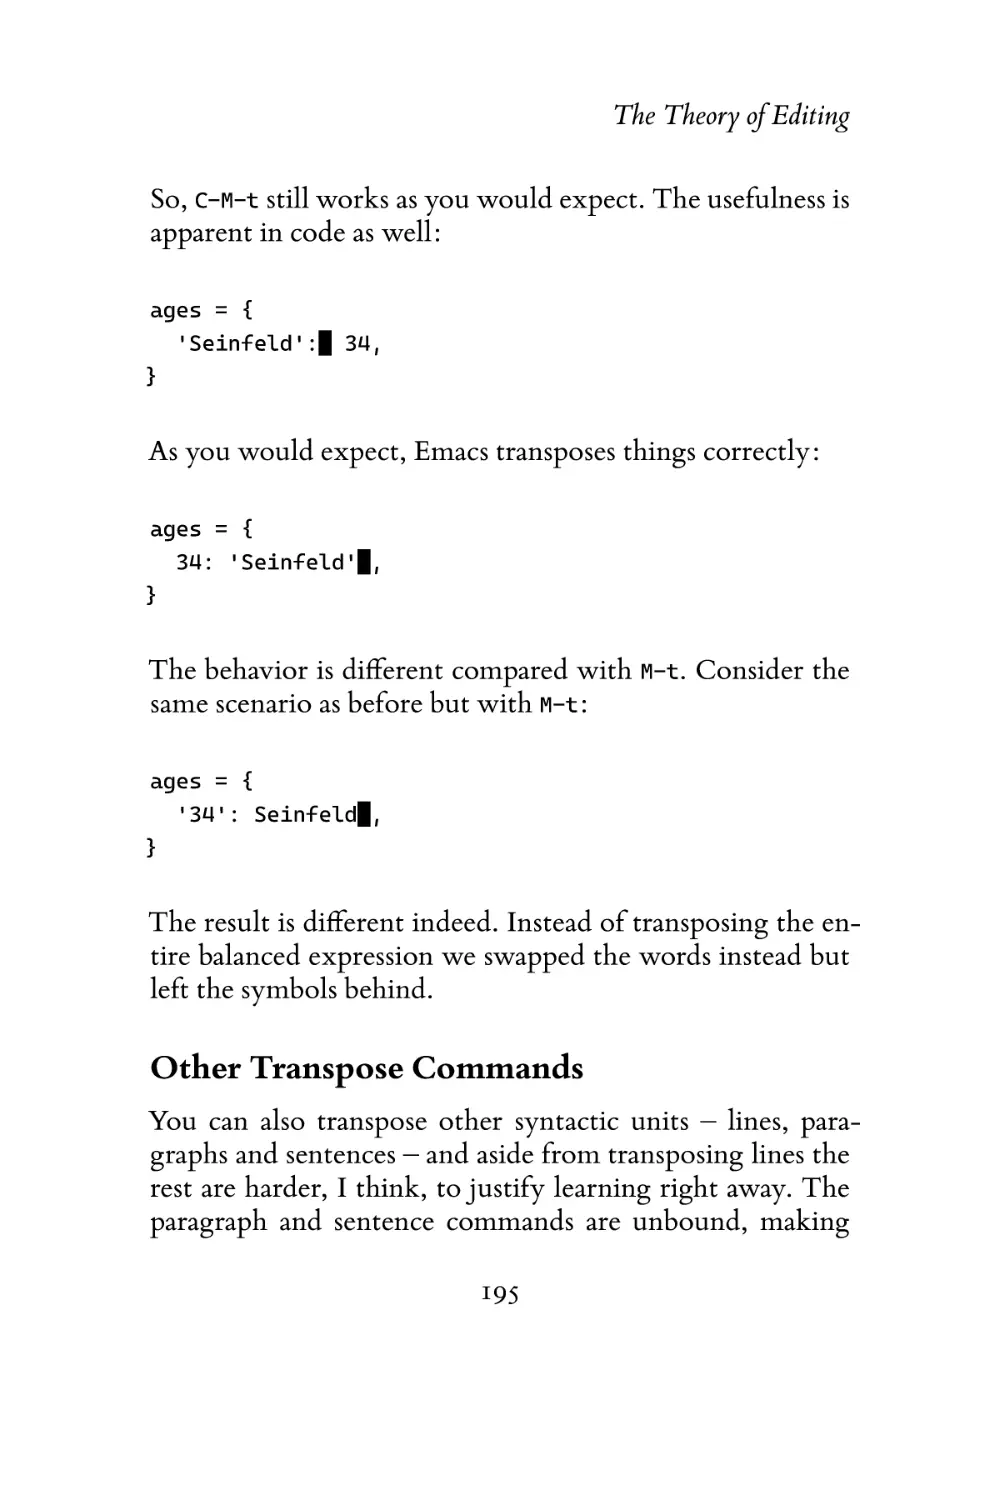 Other Transpose Commands